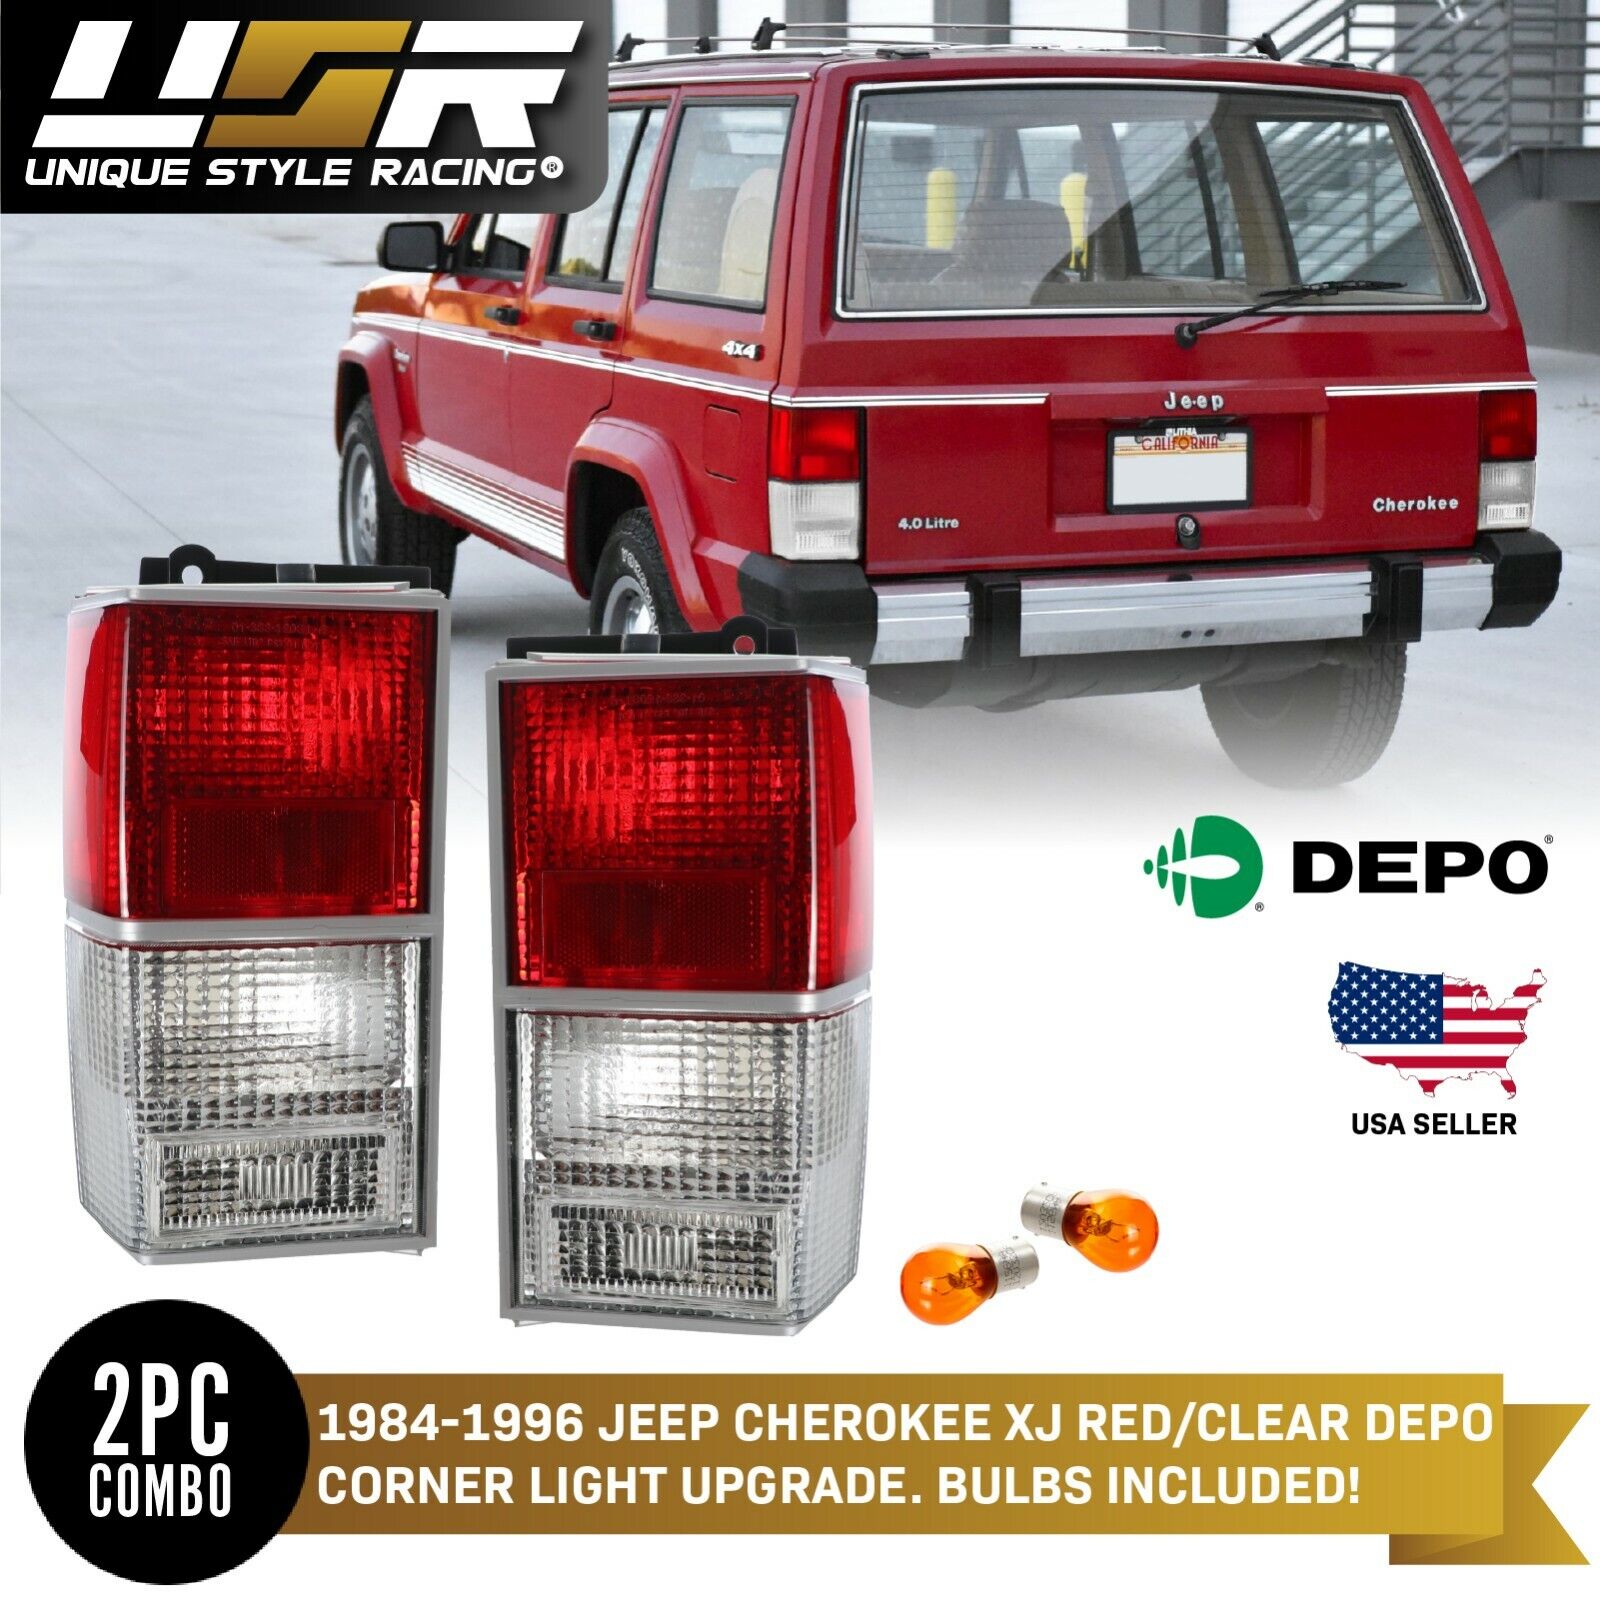 DEPO Euro Style Red/Clear Rear Tail Light Set for 1984-1996 Jeep Cherokee XJ